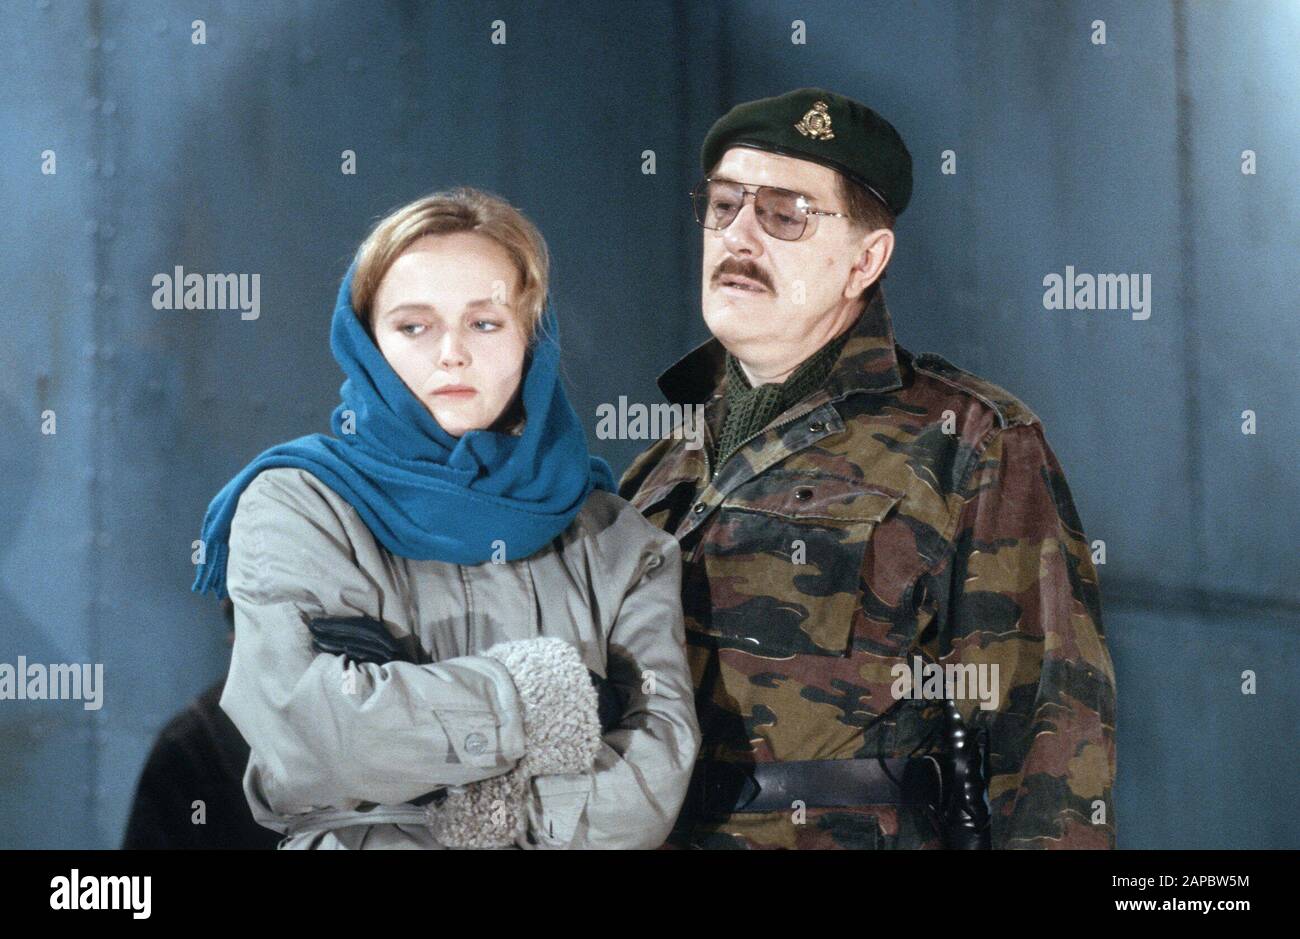 Miranda Richardson (Young Woman) with Michael Gambon (Sergeant) in MOUNTAIN LANGUAGE written & directed by by Harold Pinter at the Lyttelton Theatre, National Theatre (NT) London in 1988. Michael John Gambon, born in Cabra, Dublin in 1940, moved to London at the age of 6 and became a British citizen. Knighted in 1998. Multi-award-winner, including 3 Oliviers and 4 BAFTAs. Stock Photo